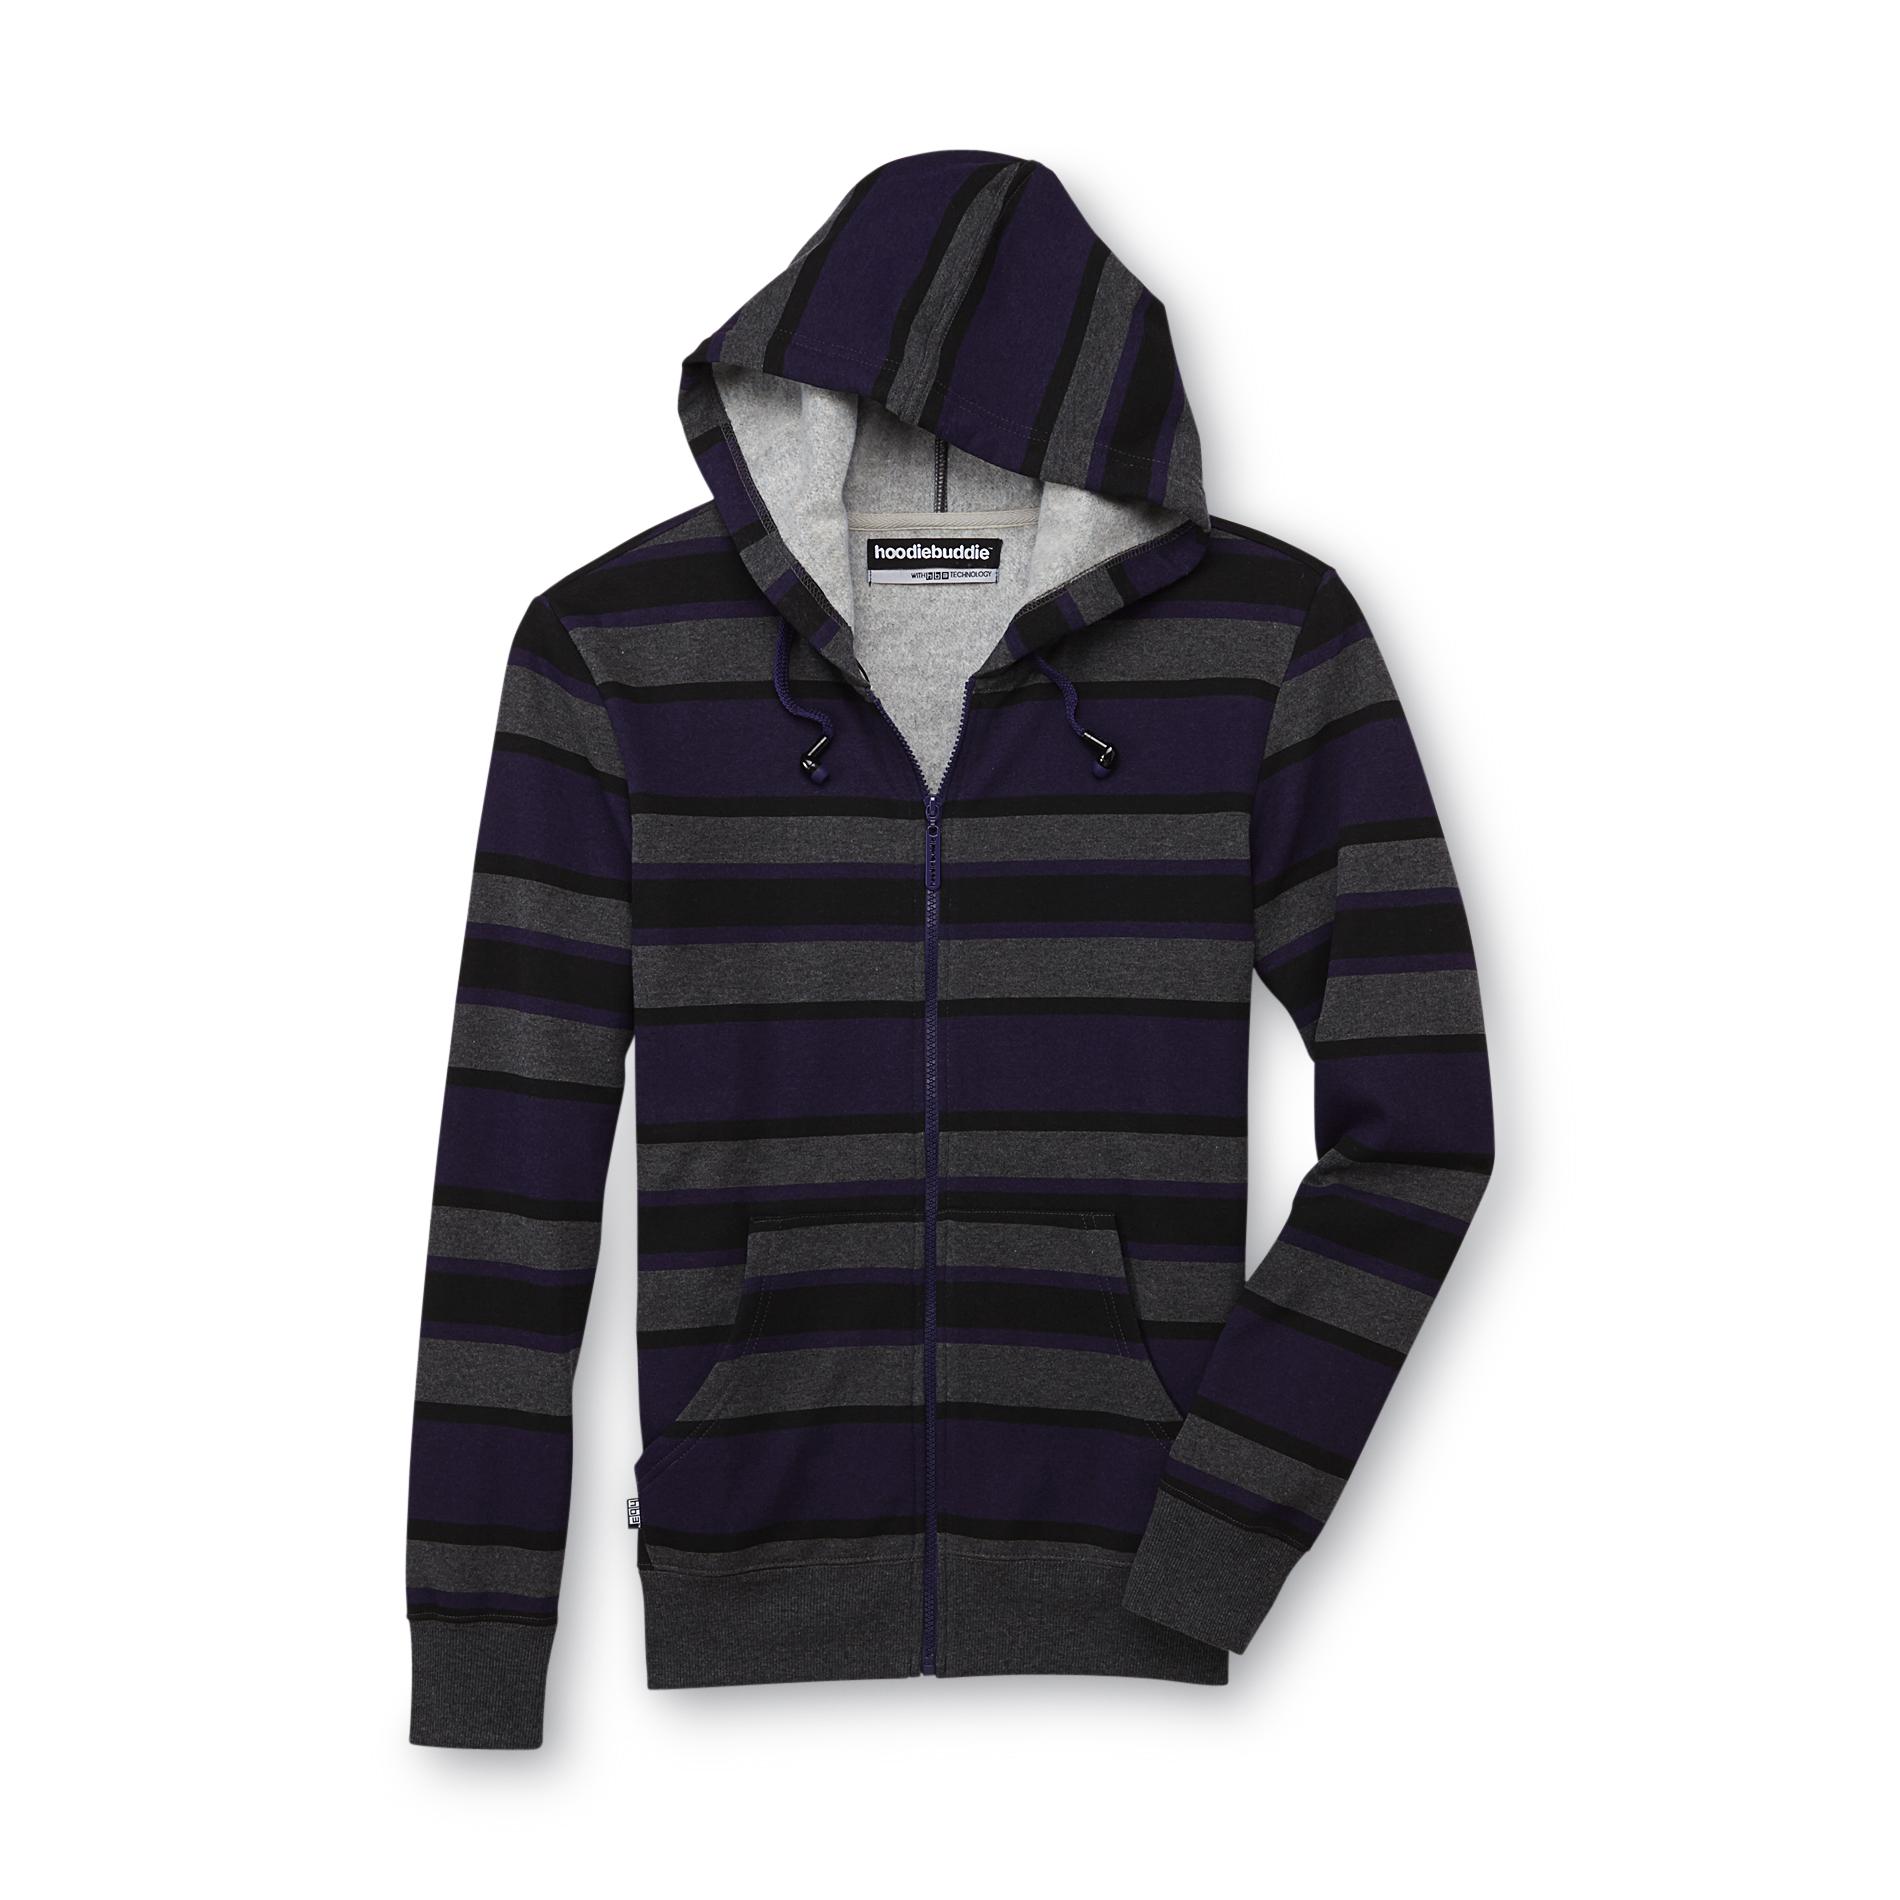 Young Men's Hoodie Jacket & Earbuds - Striped